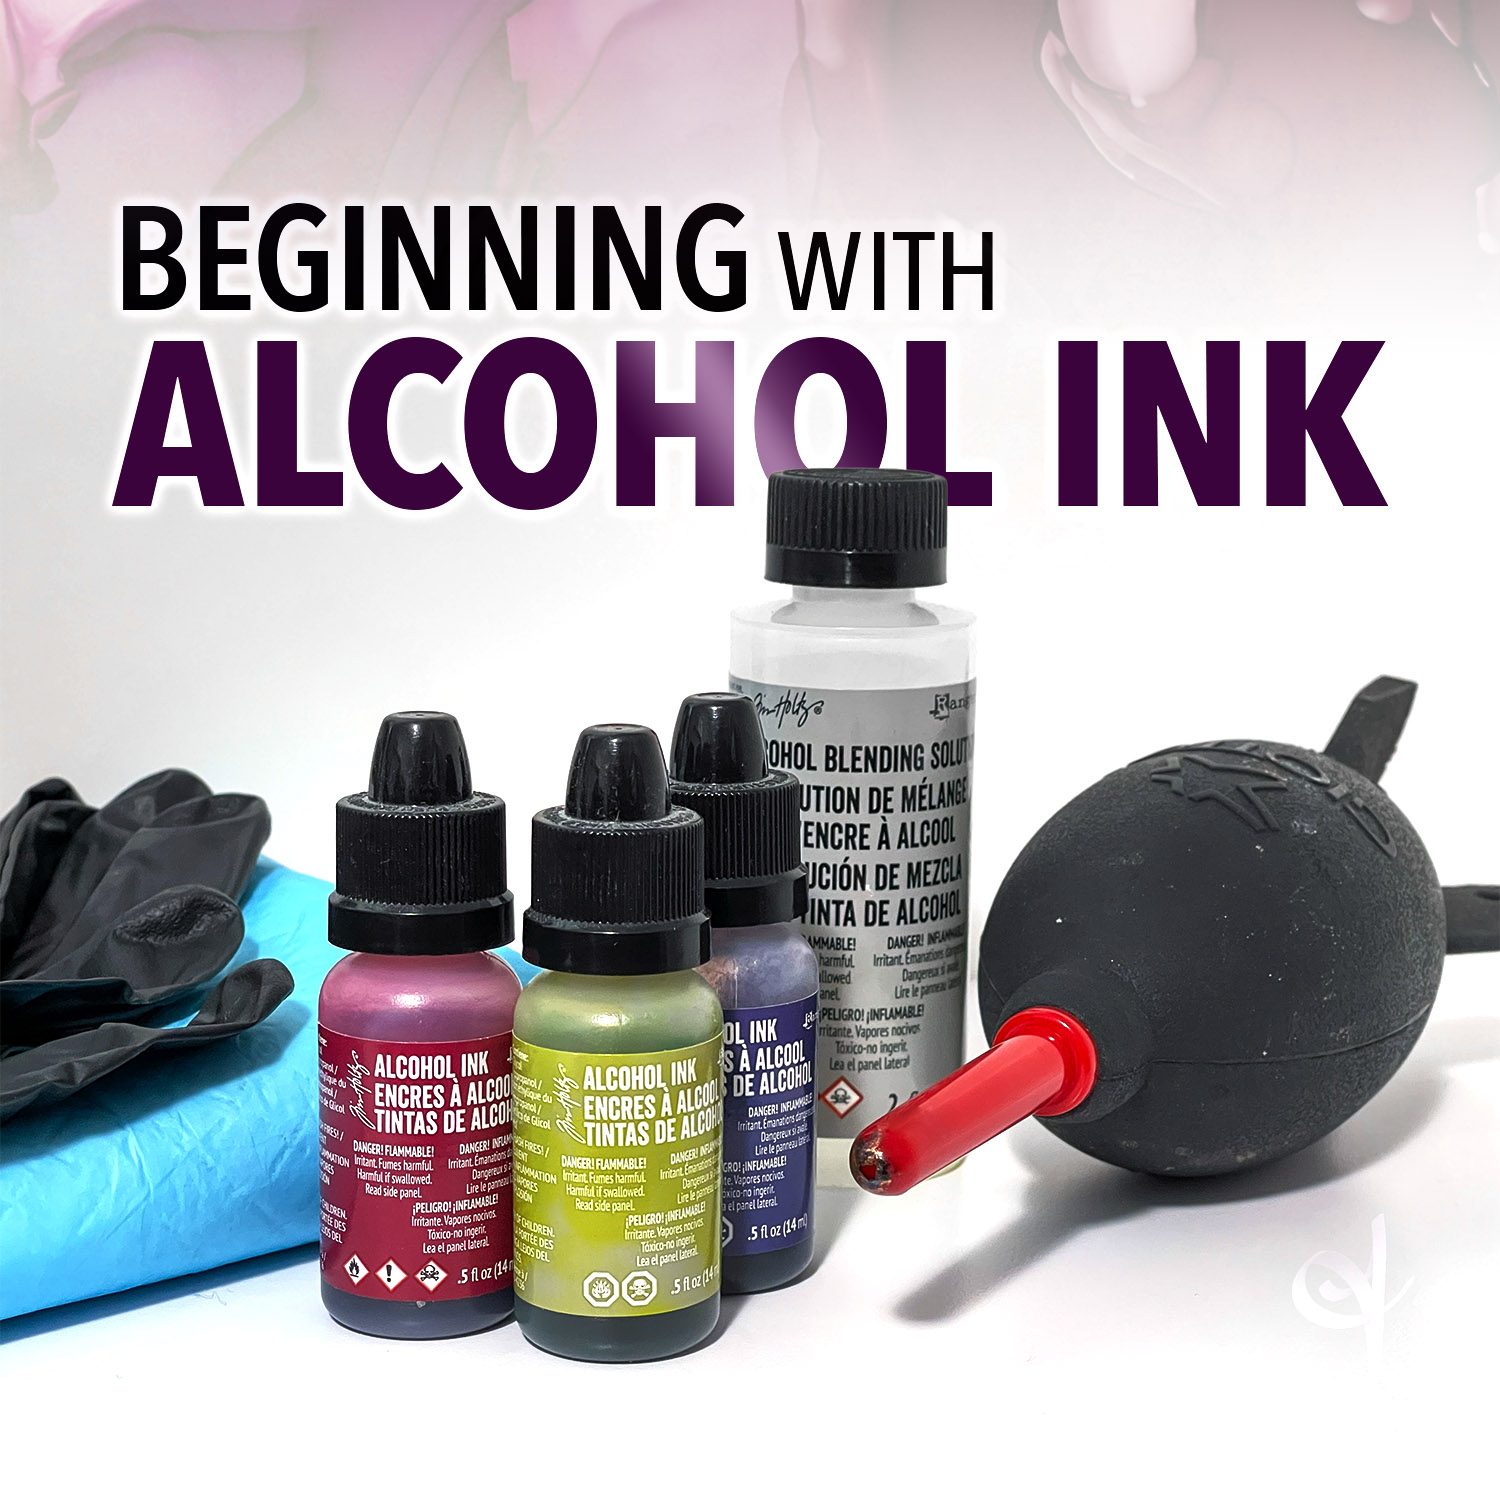 Featured image for “Beginning With Alcohol Ink”